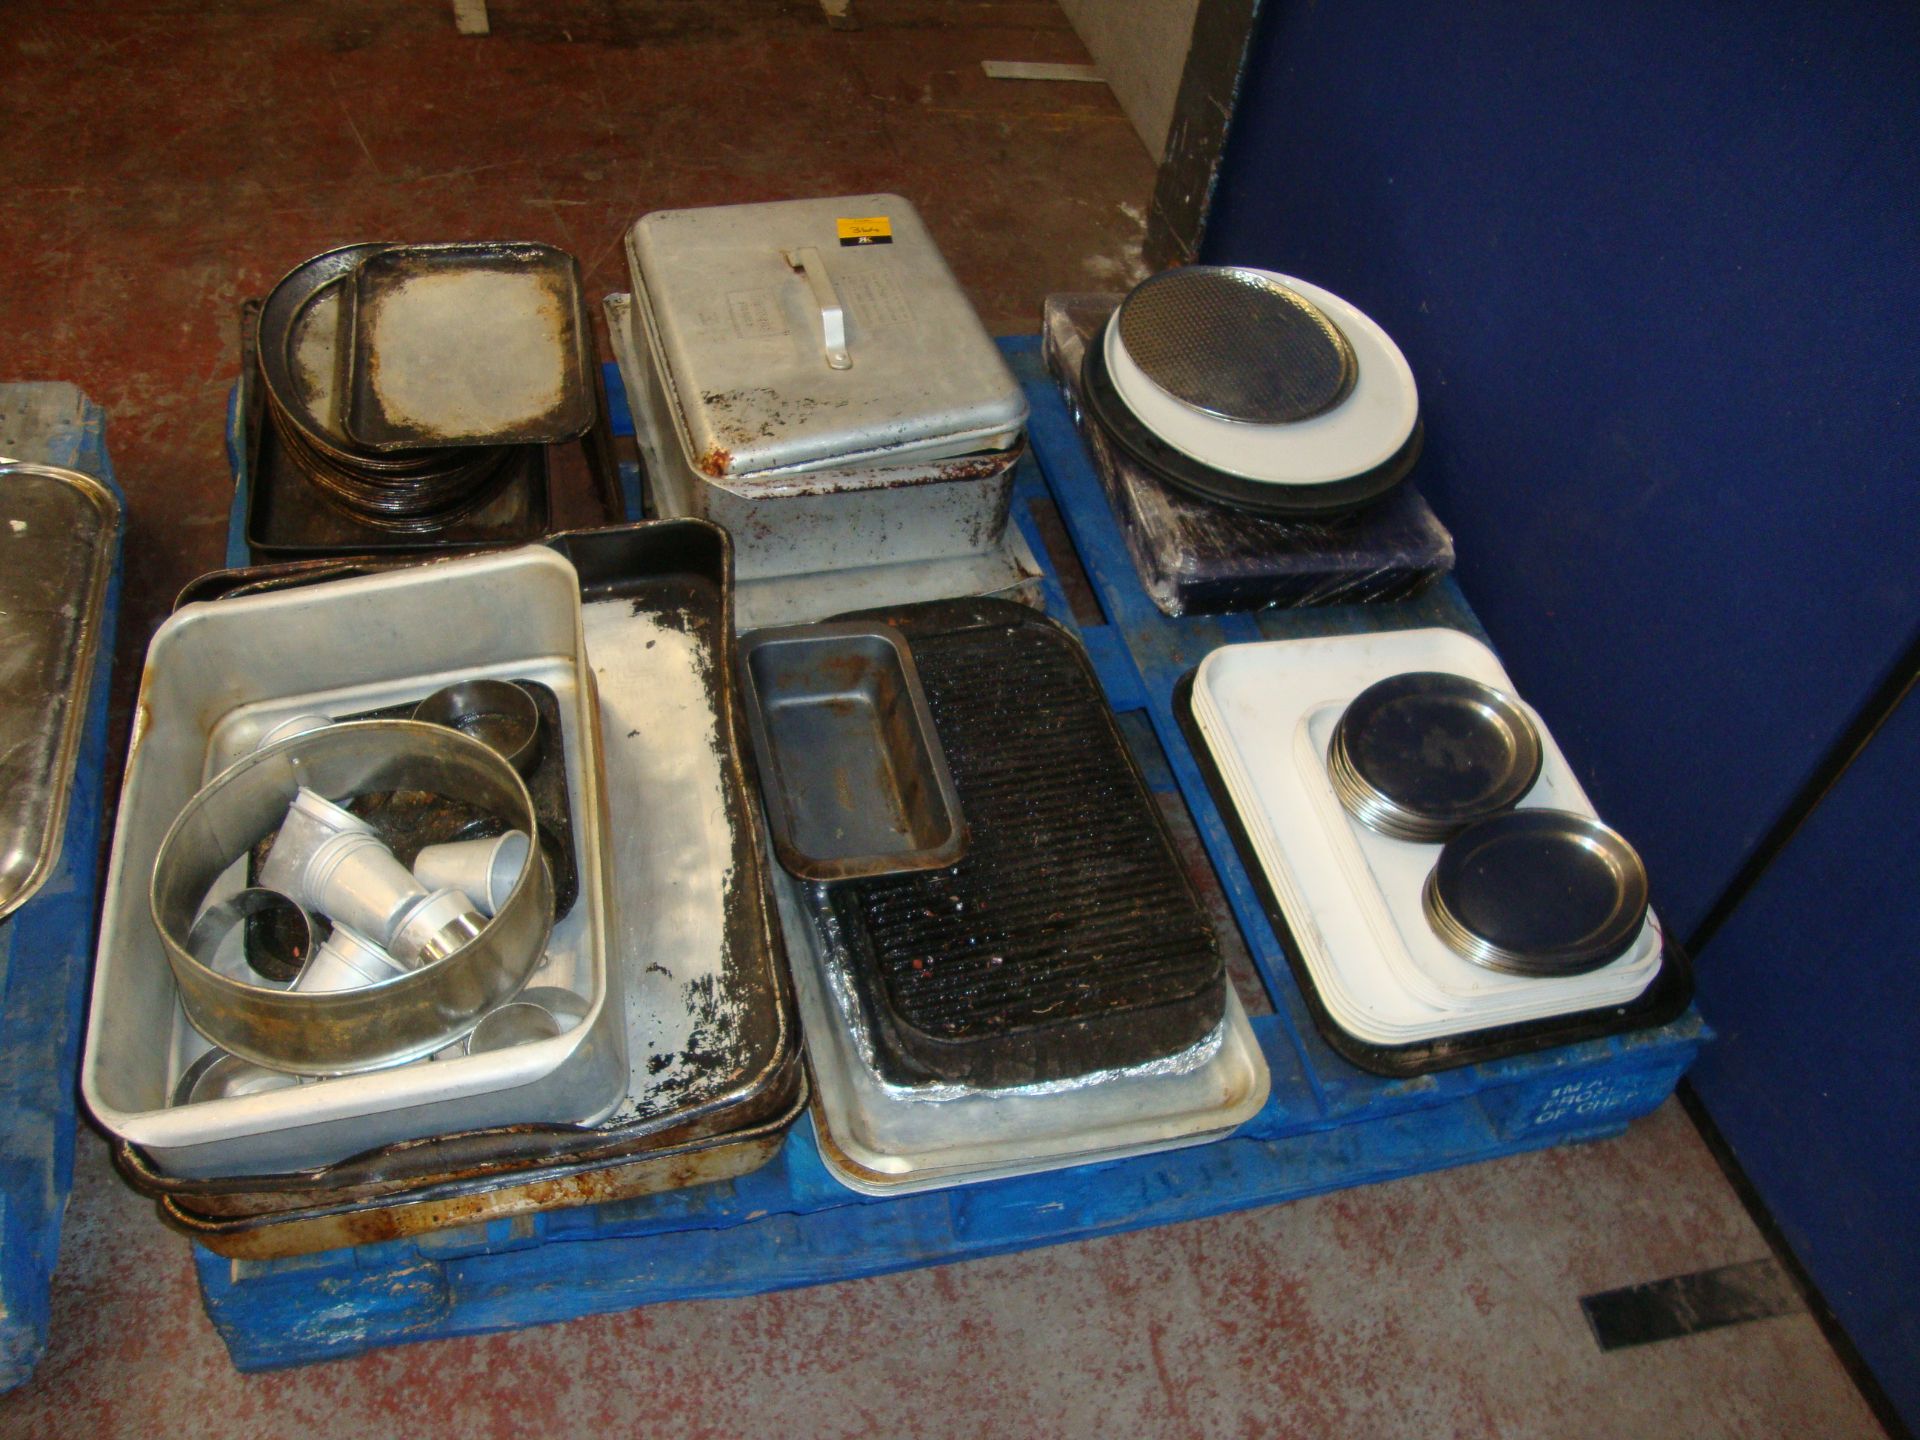 The contents of a pallet of assorted trays, dishes & other items